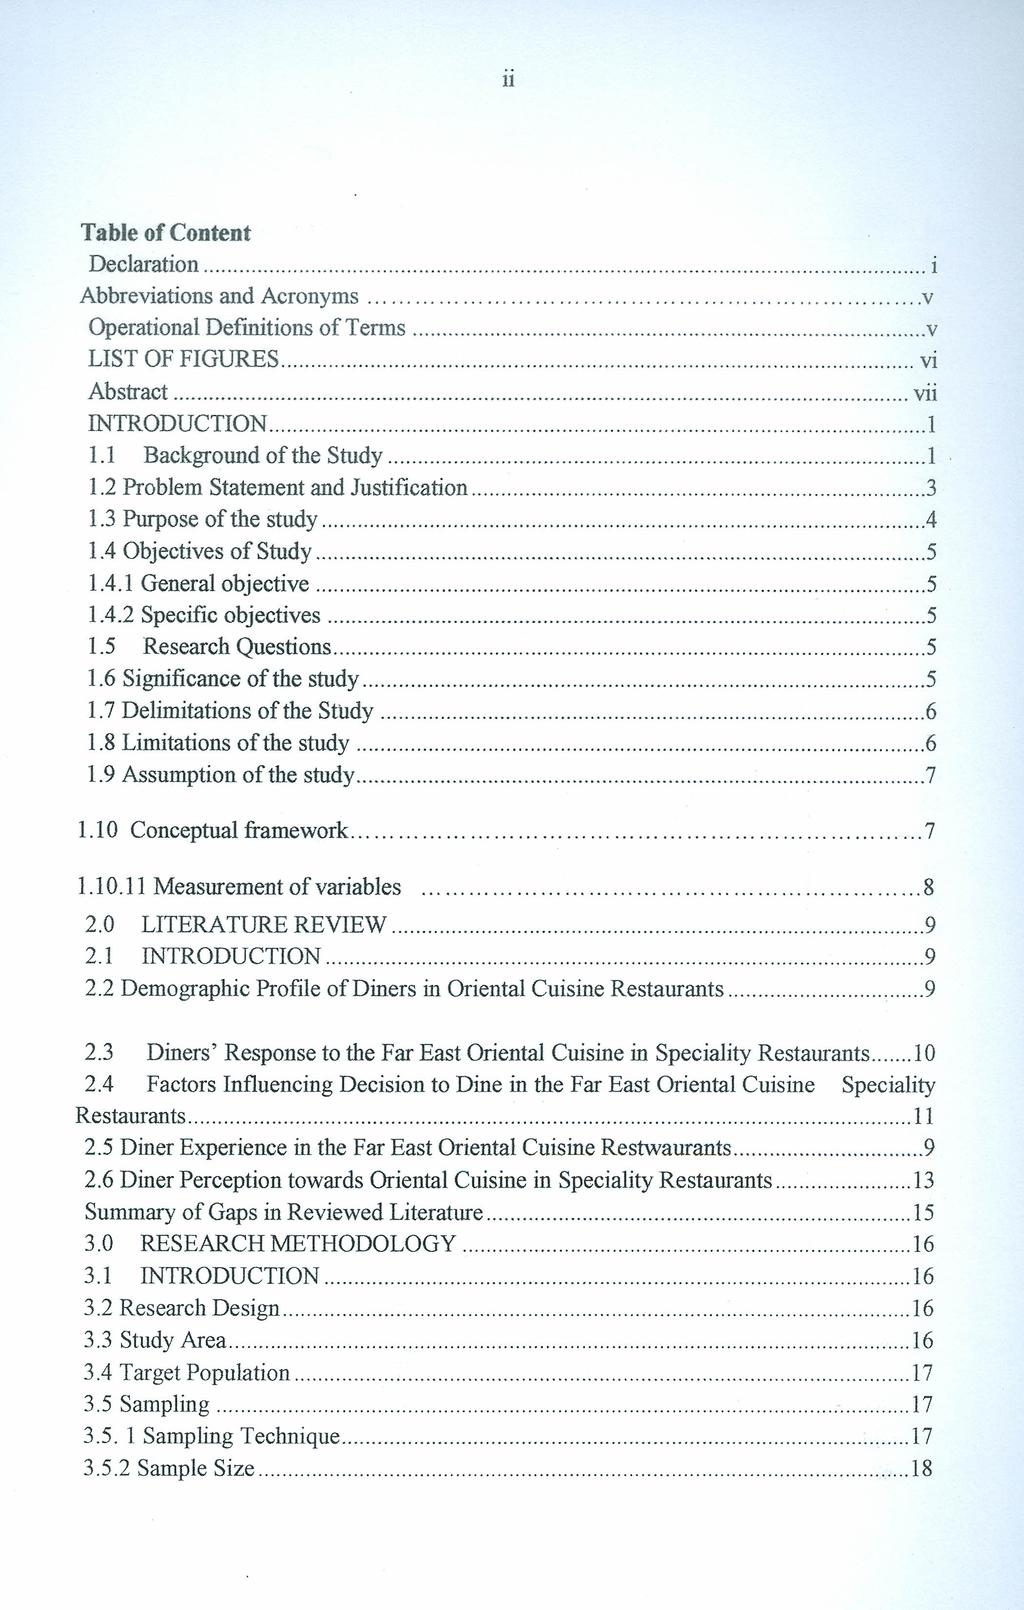 11 Table of Content Declaration Abbreviations and Acronyms Operational Definitions of Terms LIST OF FIGURES Abstract vii WTRODUCTION 1 1.1 Background of the Study 1 1.